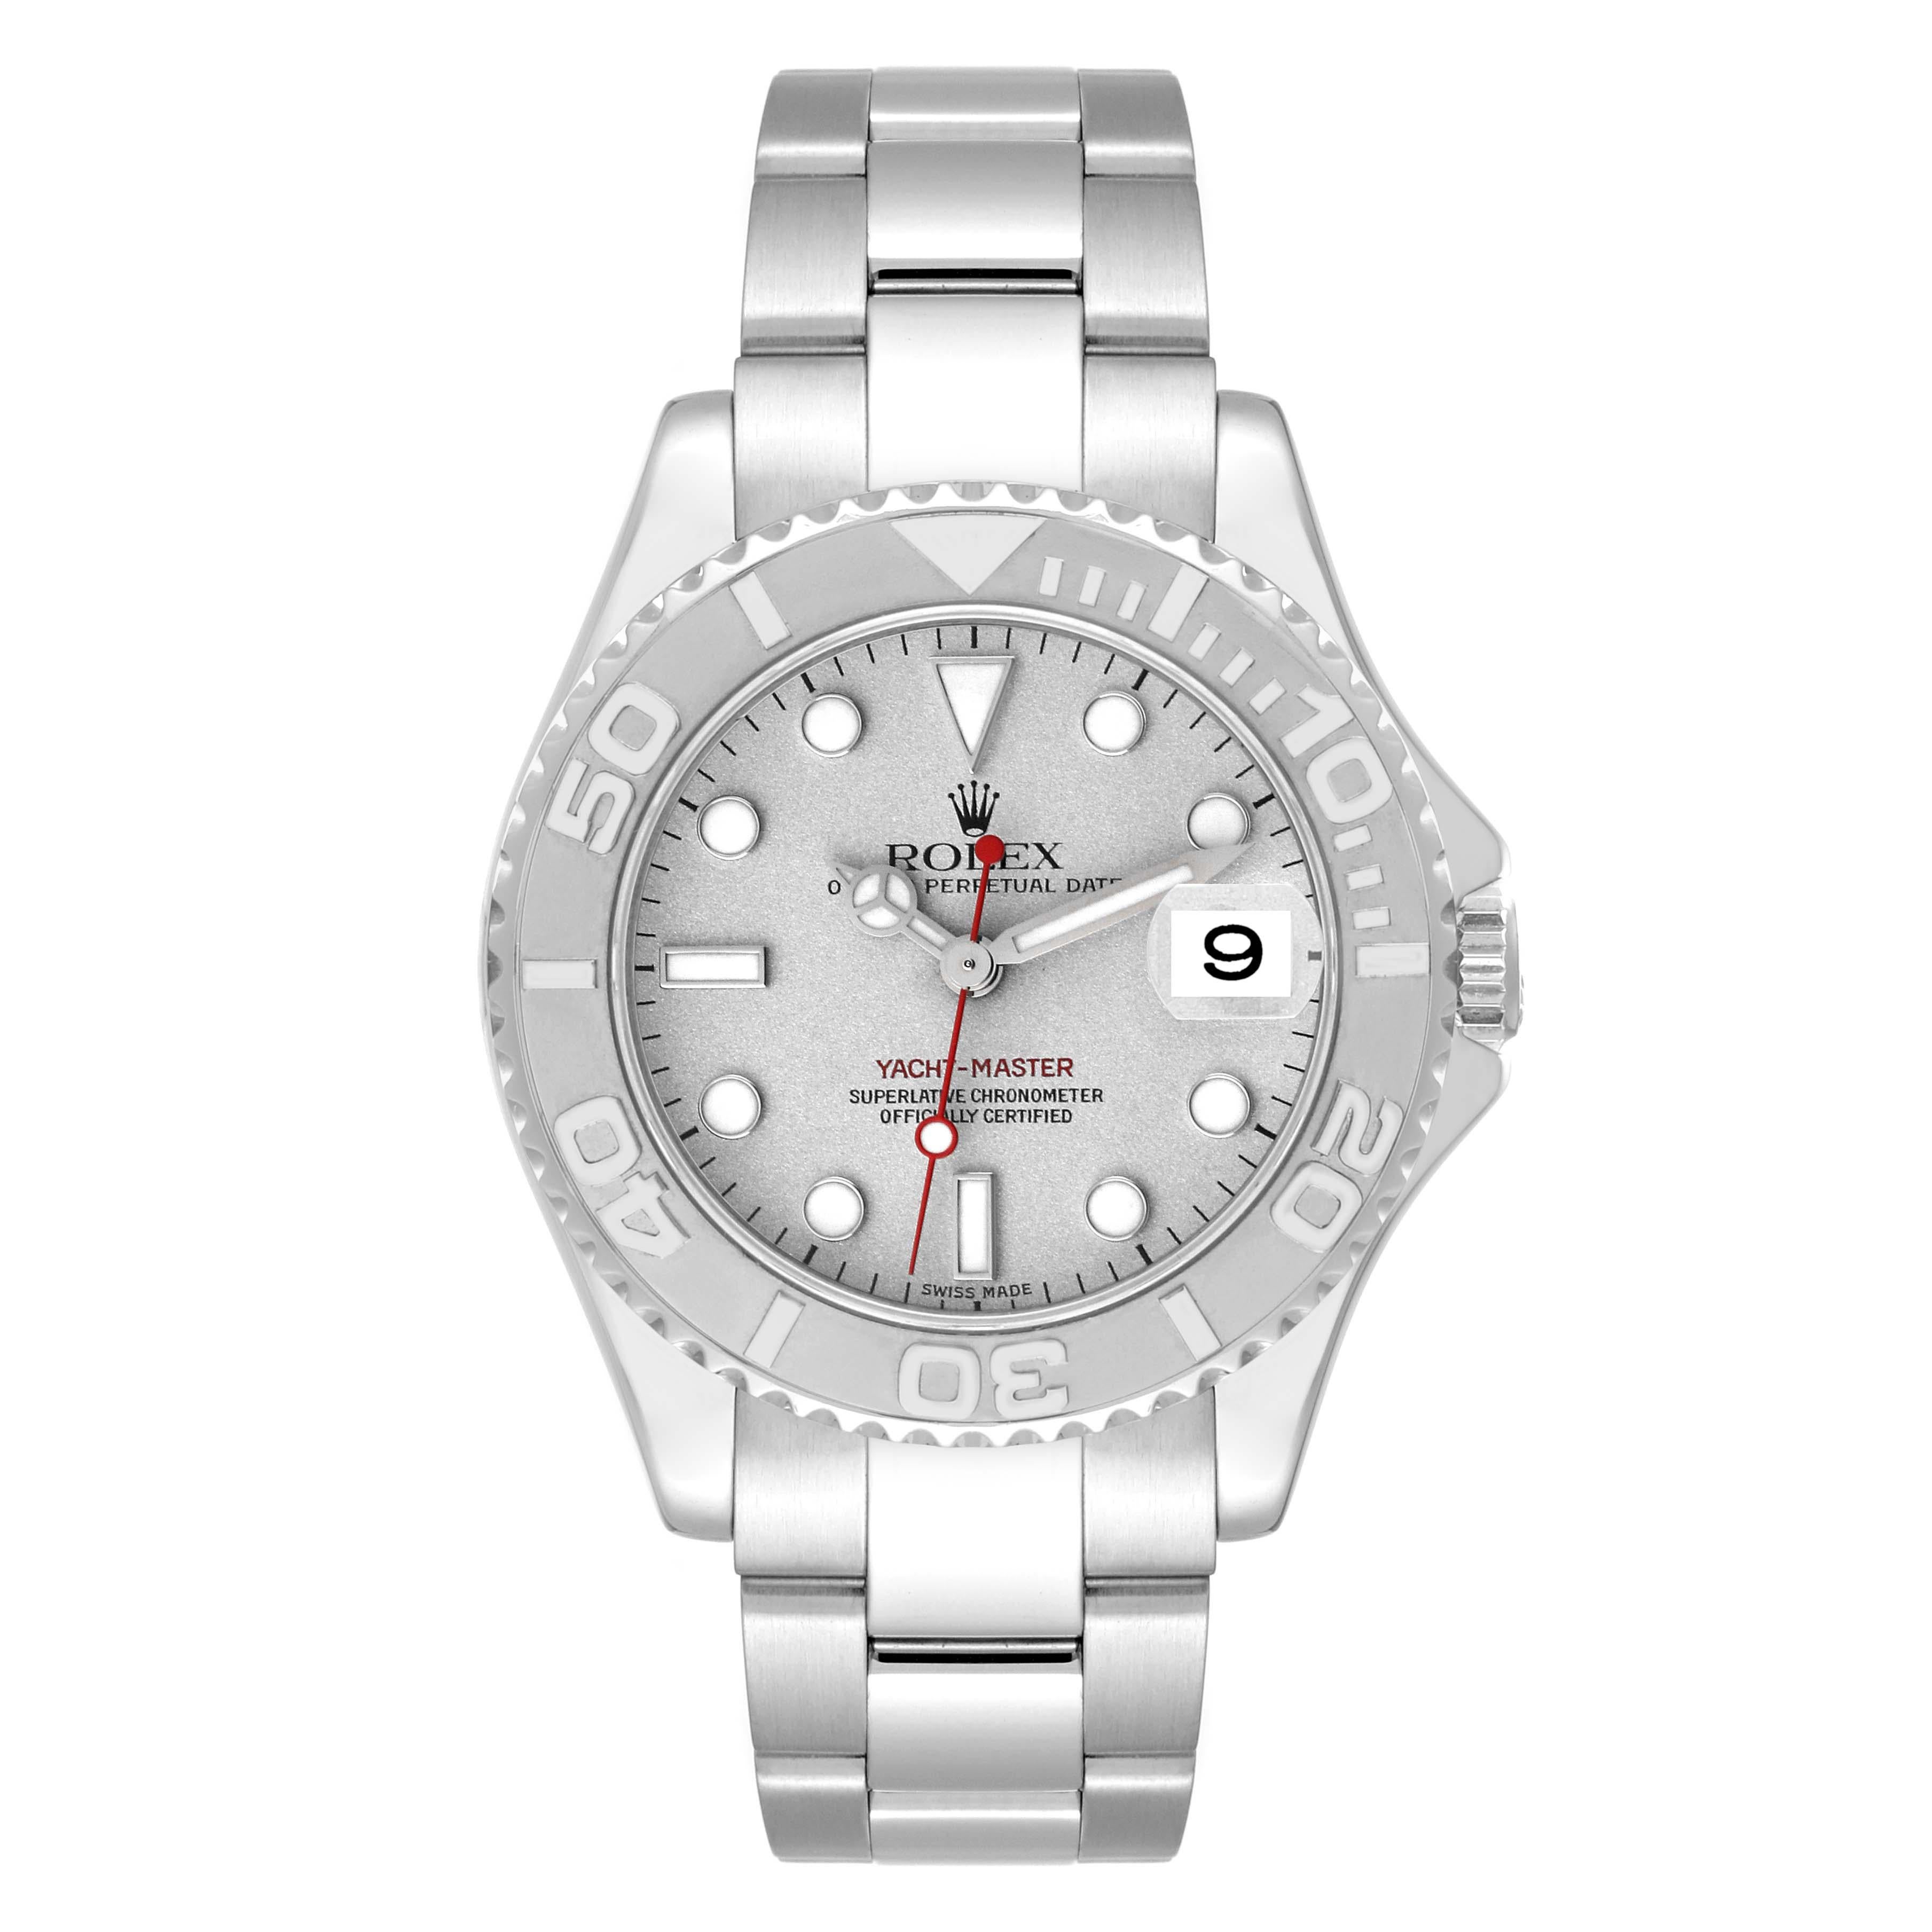 Rolex Yachtmaster 35 Midsize Steel Platinum Mens Watch 168622. Officially certified chronometer automatic self-winding movement. Stainless steel case 35.0 mm in diameter. Rolex logo on the crown. Platinum special time-lapse bidirectional rotating